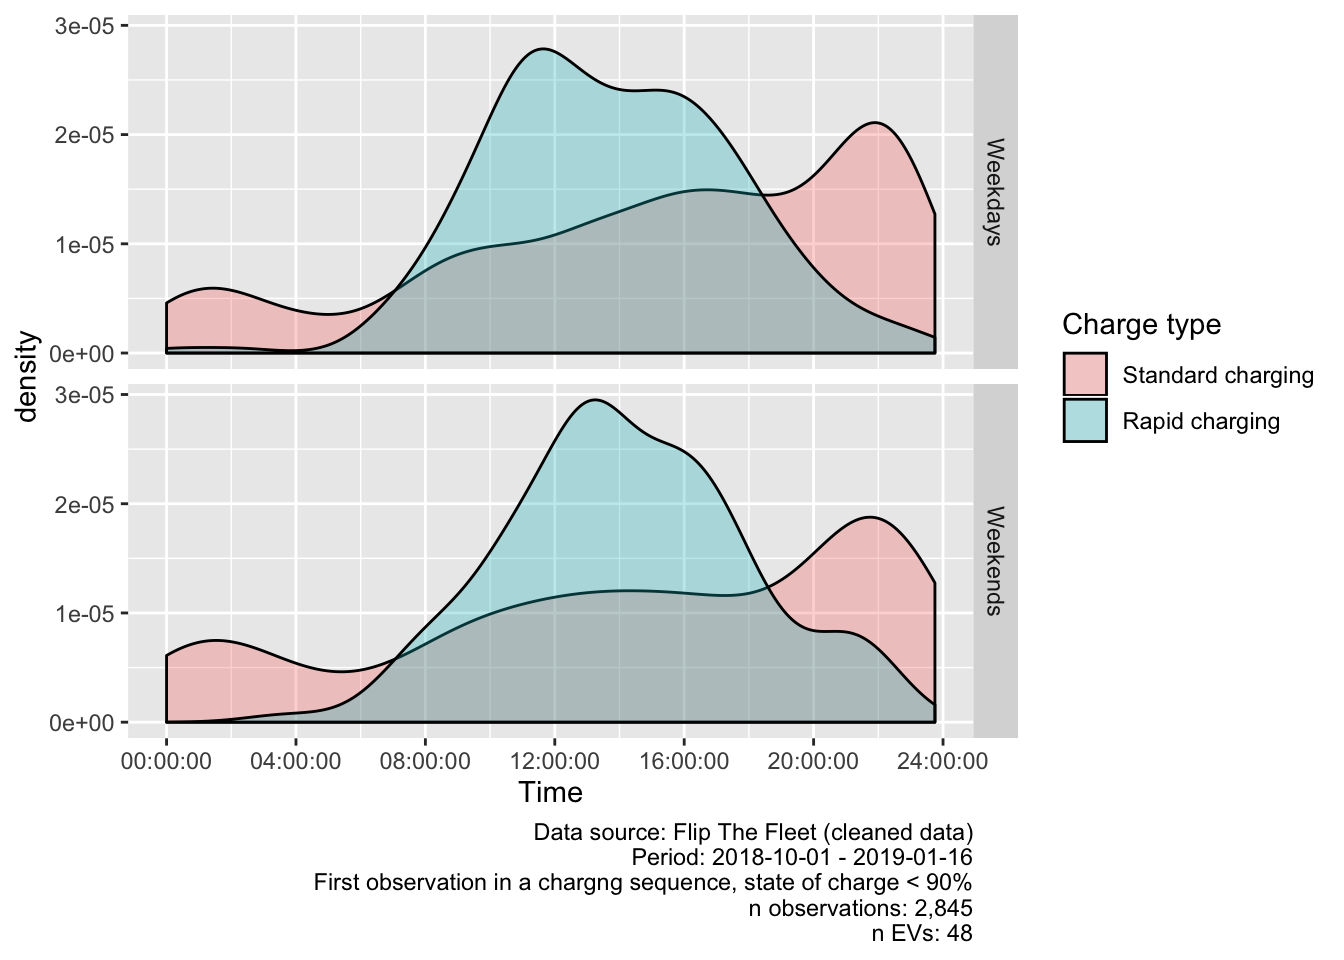 Density plot of charging start times where state of charge < 90%